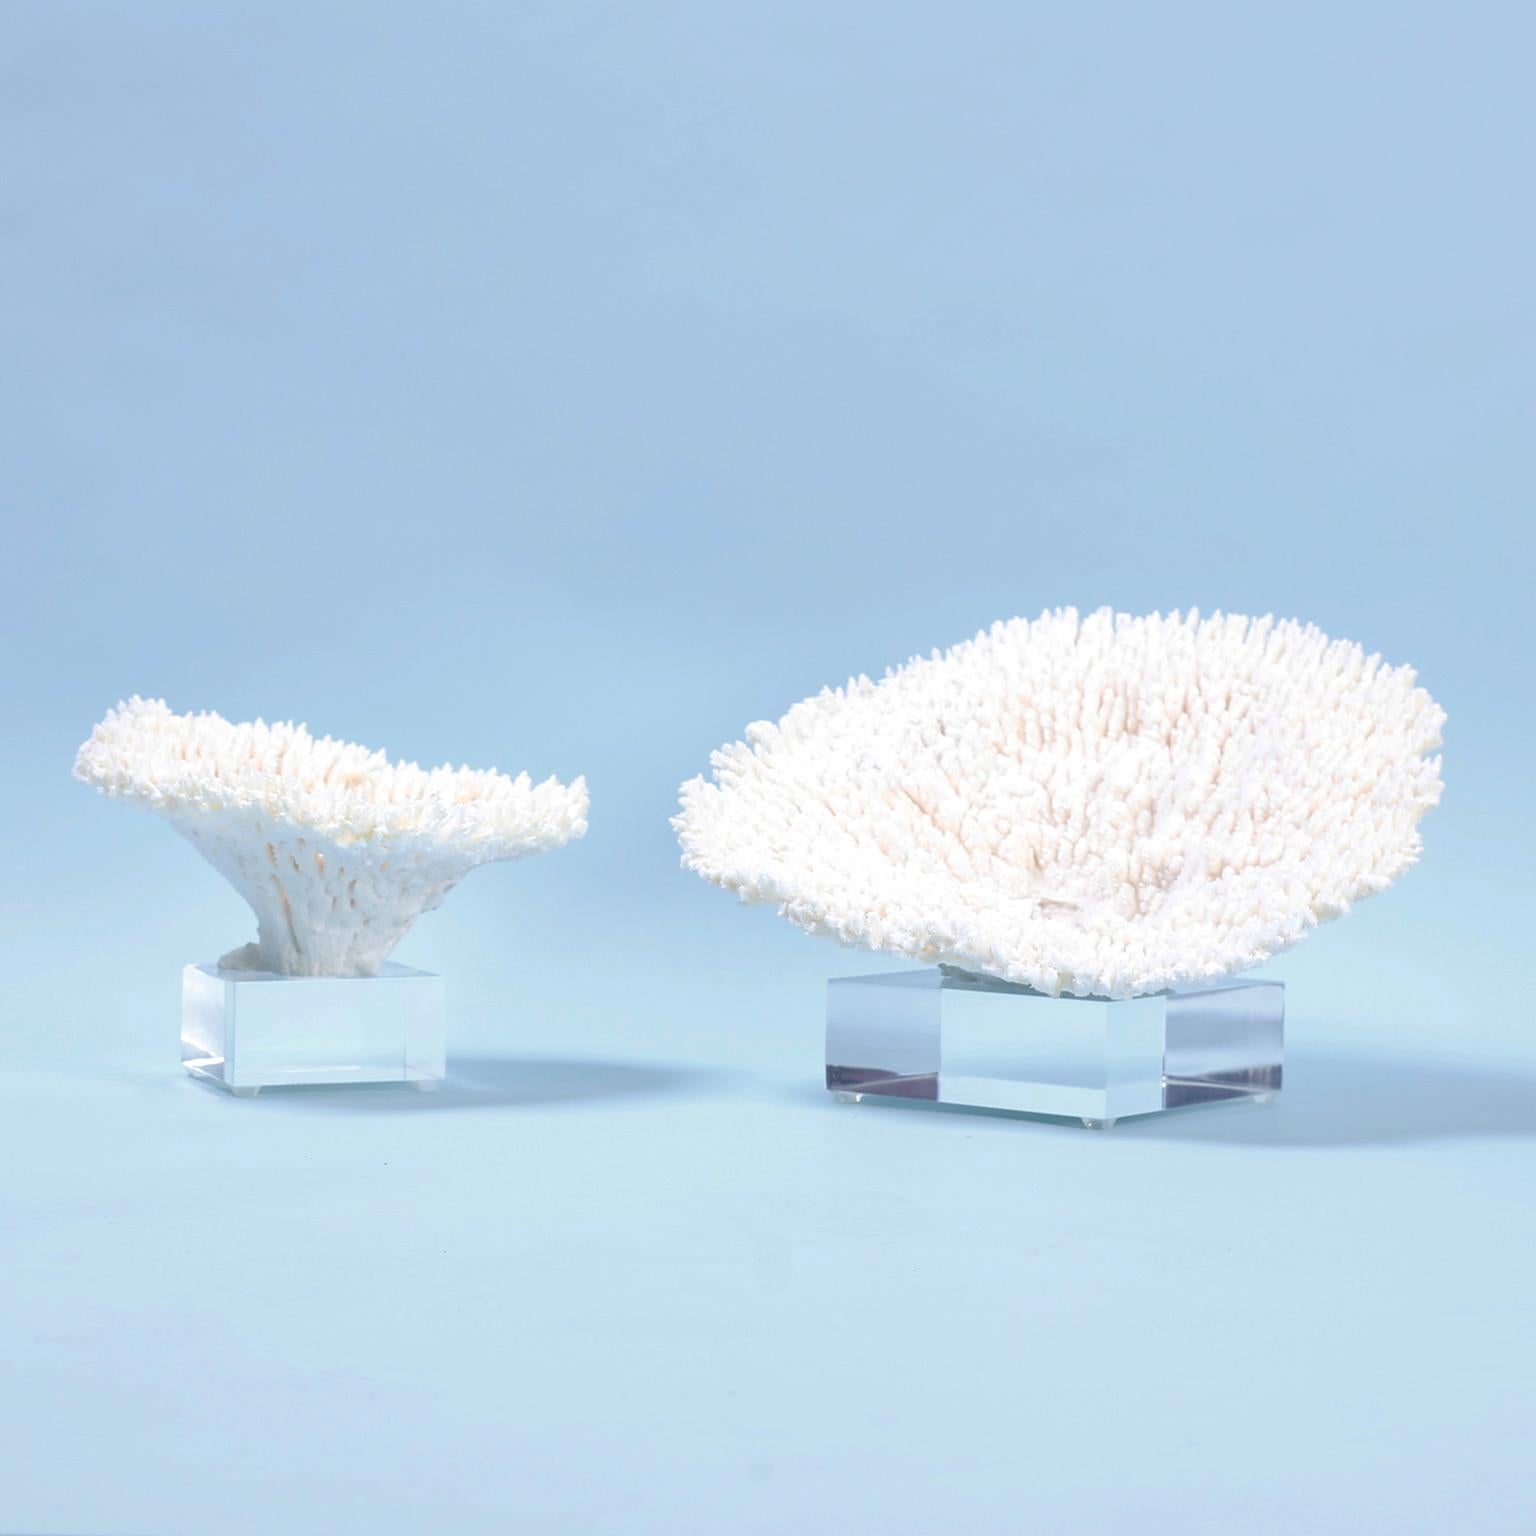 Two table coral specimens each with its own alluring form, delicate textures, and clean bleached white color. Presenting these sustainable treasures on custom Lucite stands. Priced individually.

Coral requiring export from the USA, requires